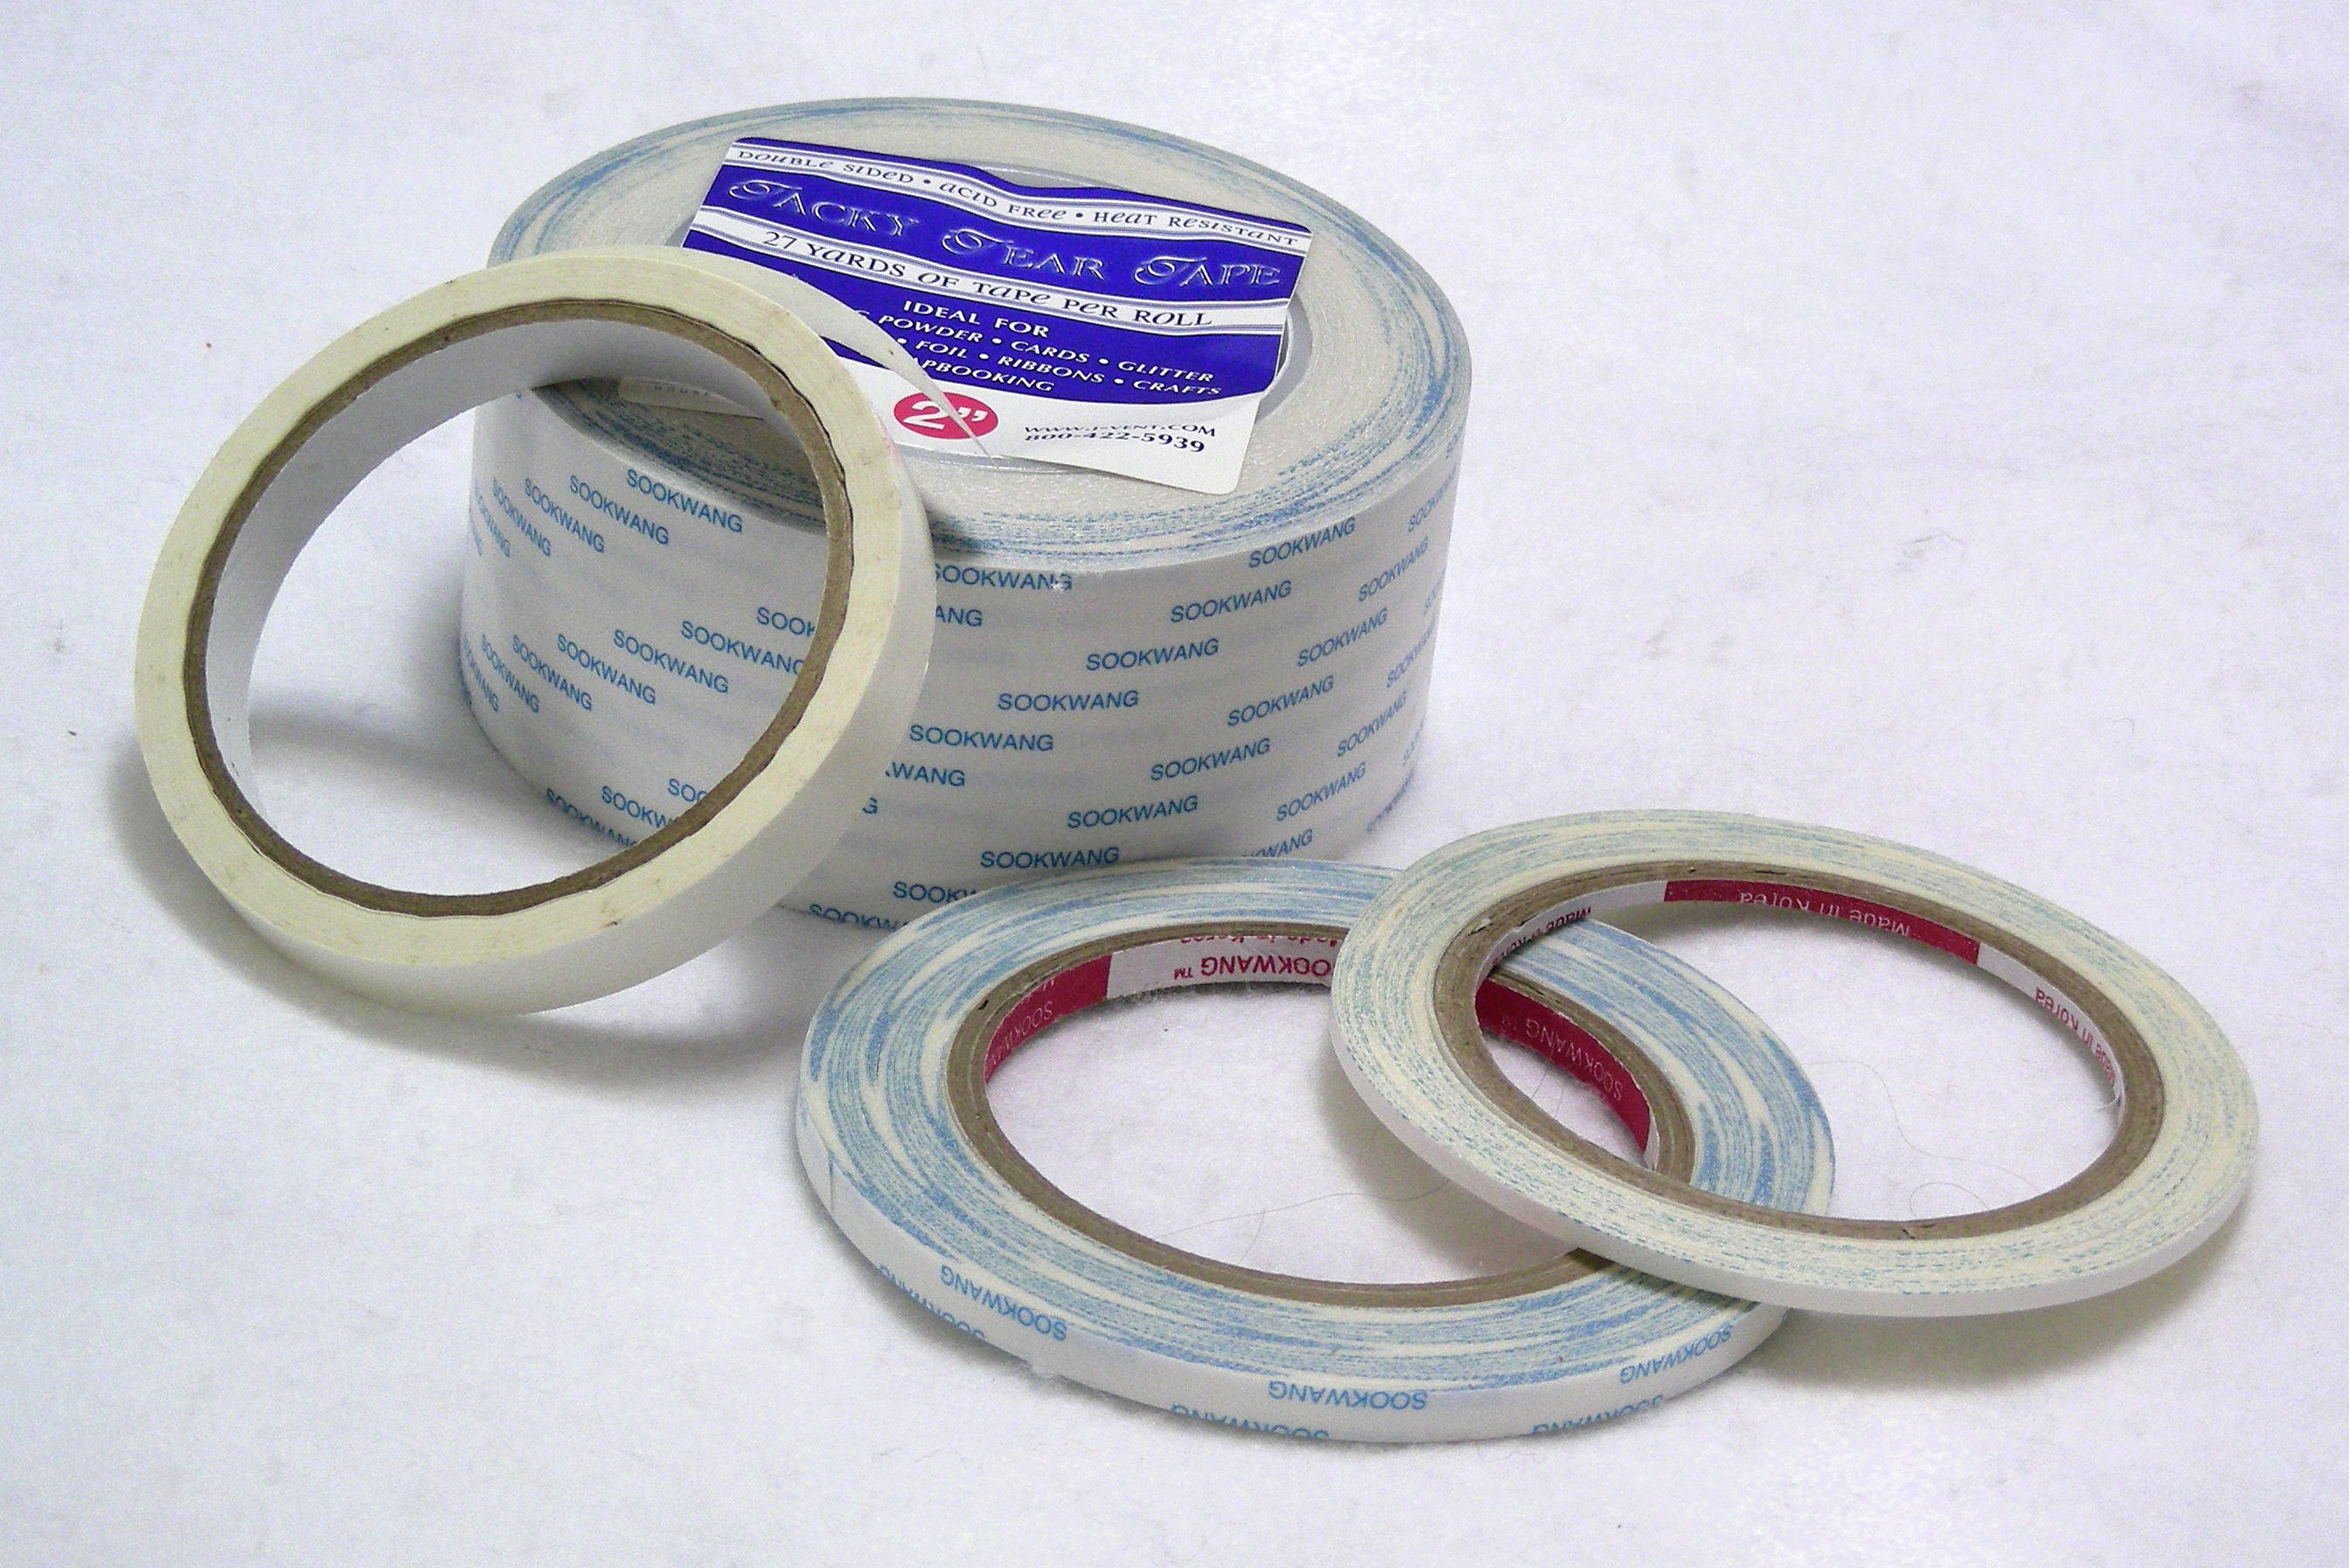 Tape vs Glue – What's Best for You?